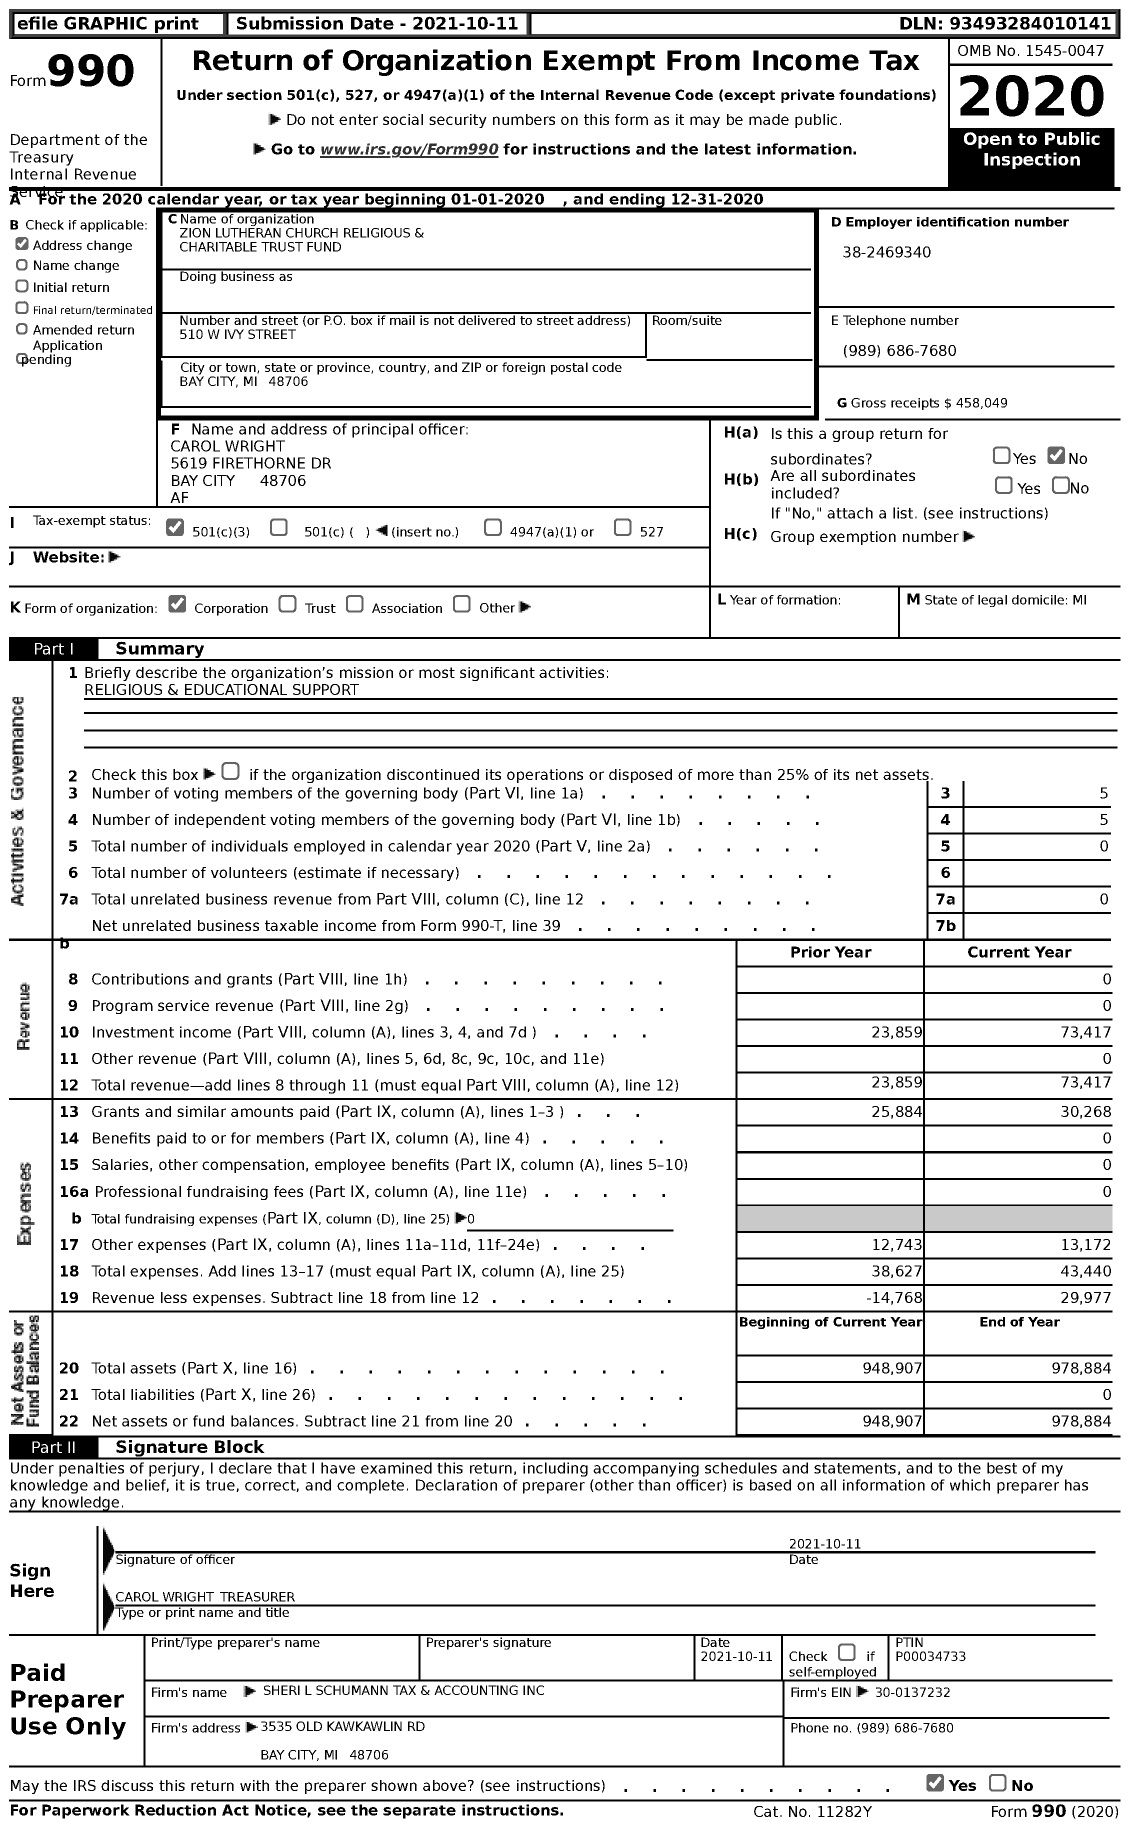 Image of first page of 2020 Form 990 for Zion Lutheran Church Religious and Charitable Trust Fund